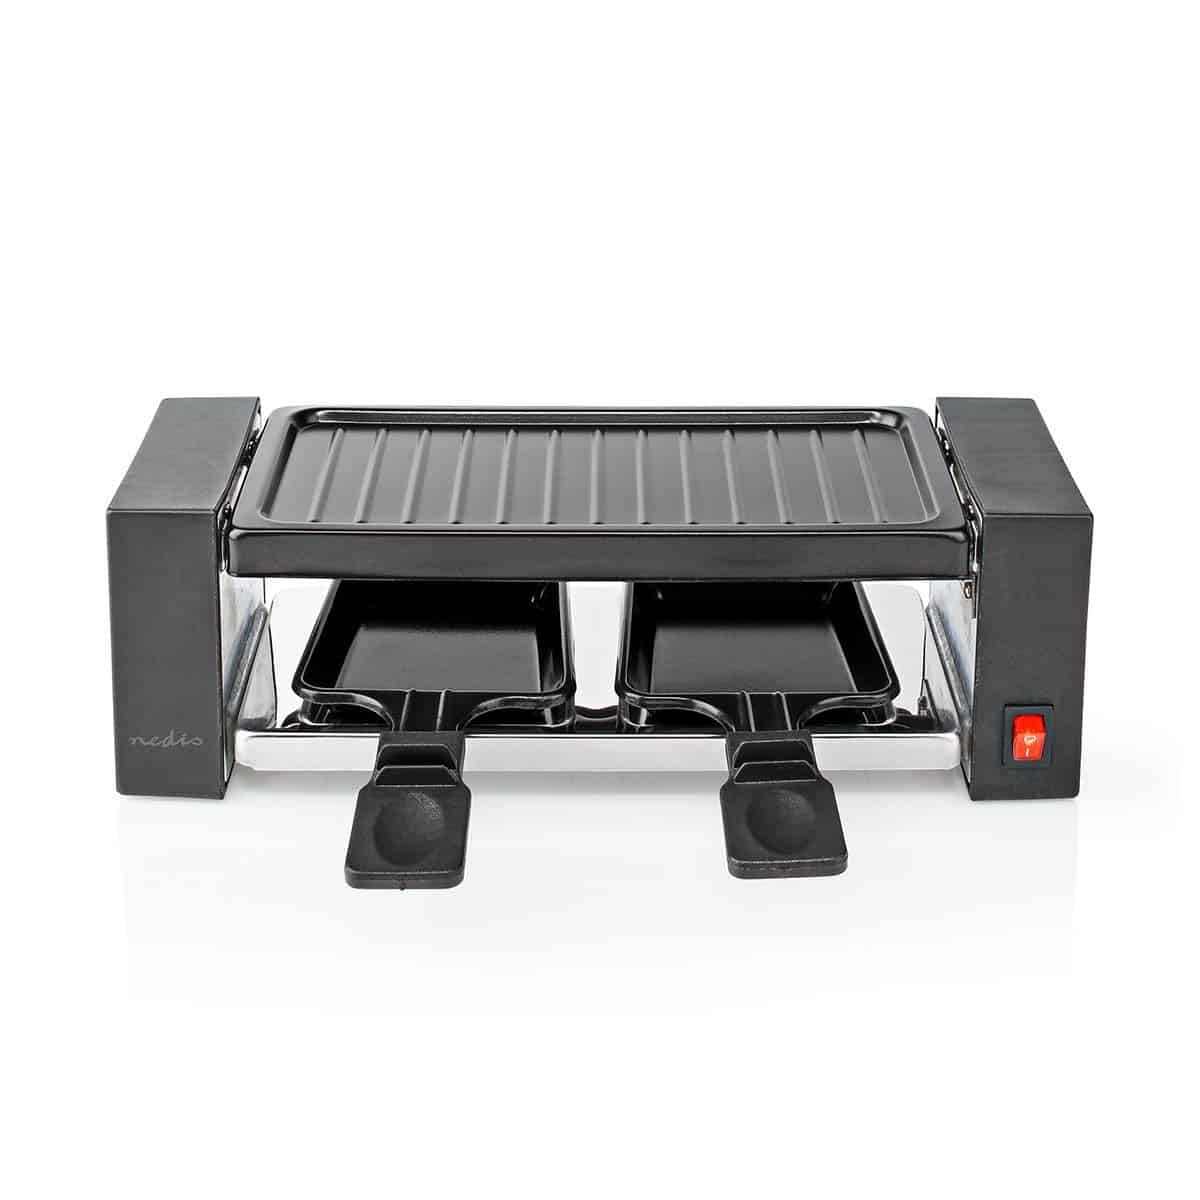 12364_1_Nedis_Gourmette_Raclette_Grill_2persons_Rectangle